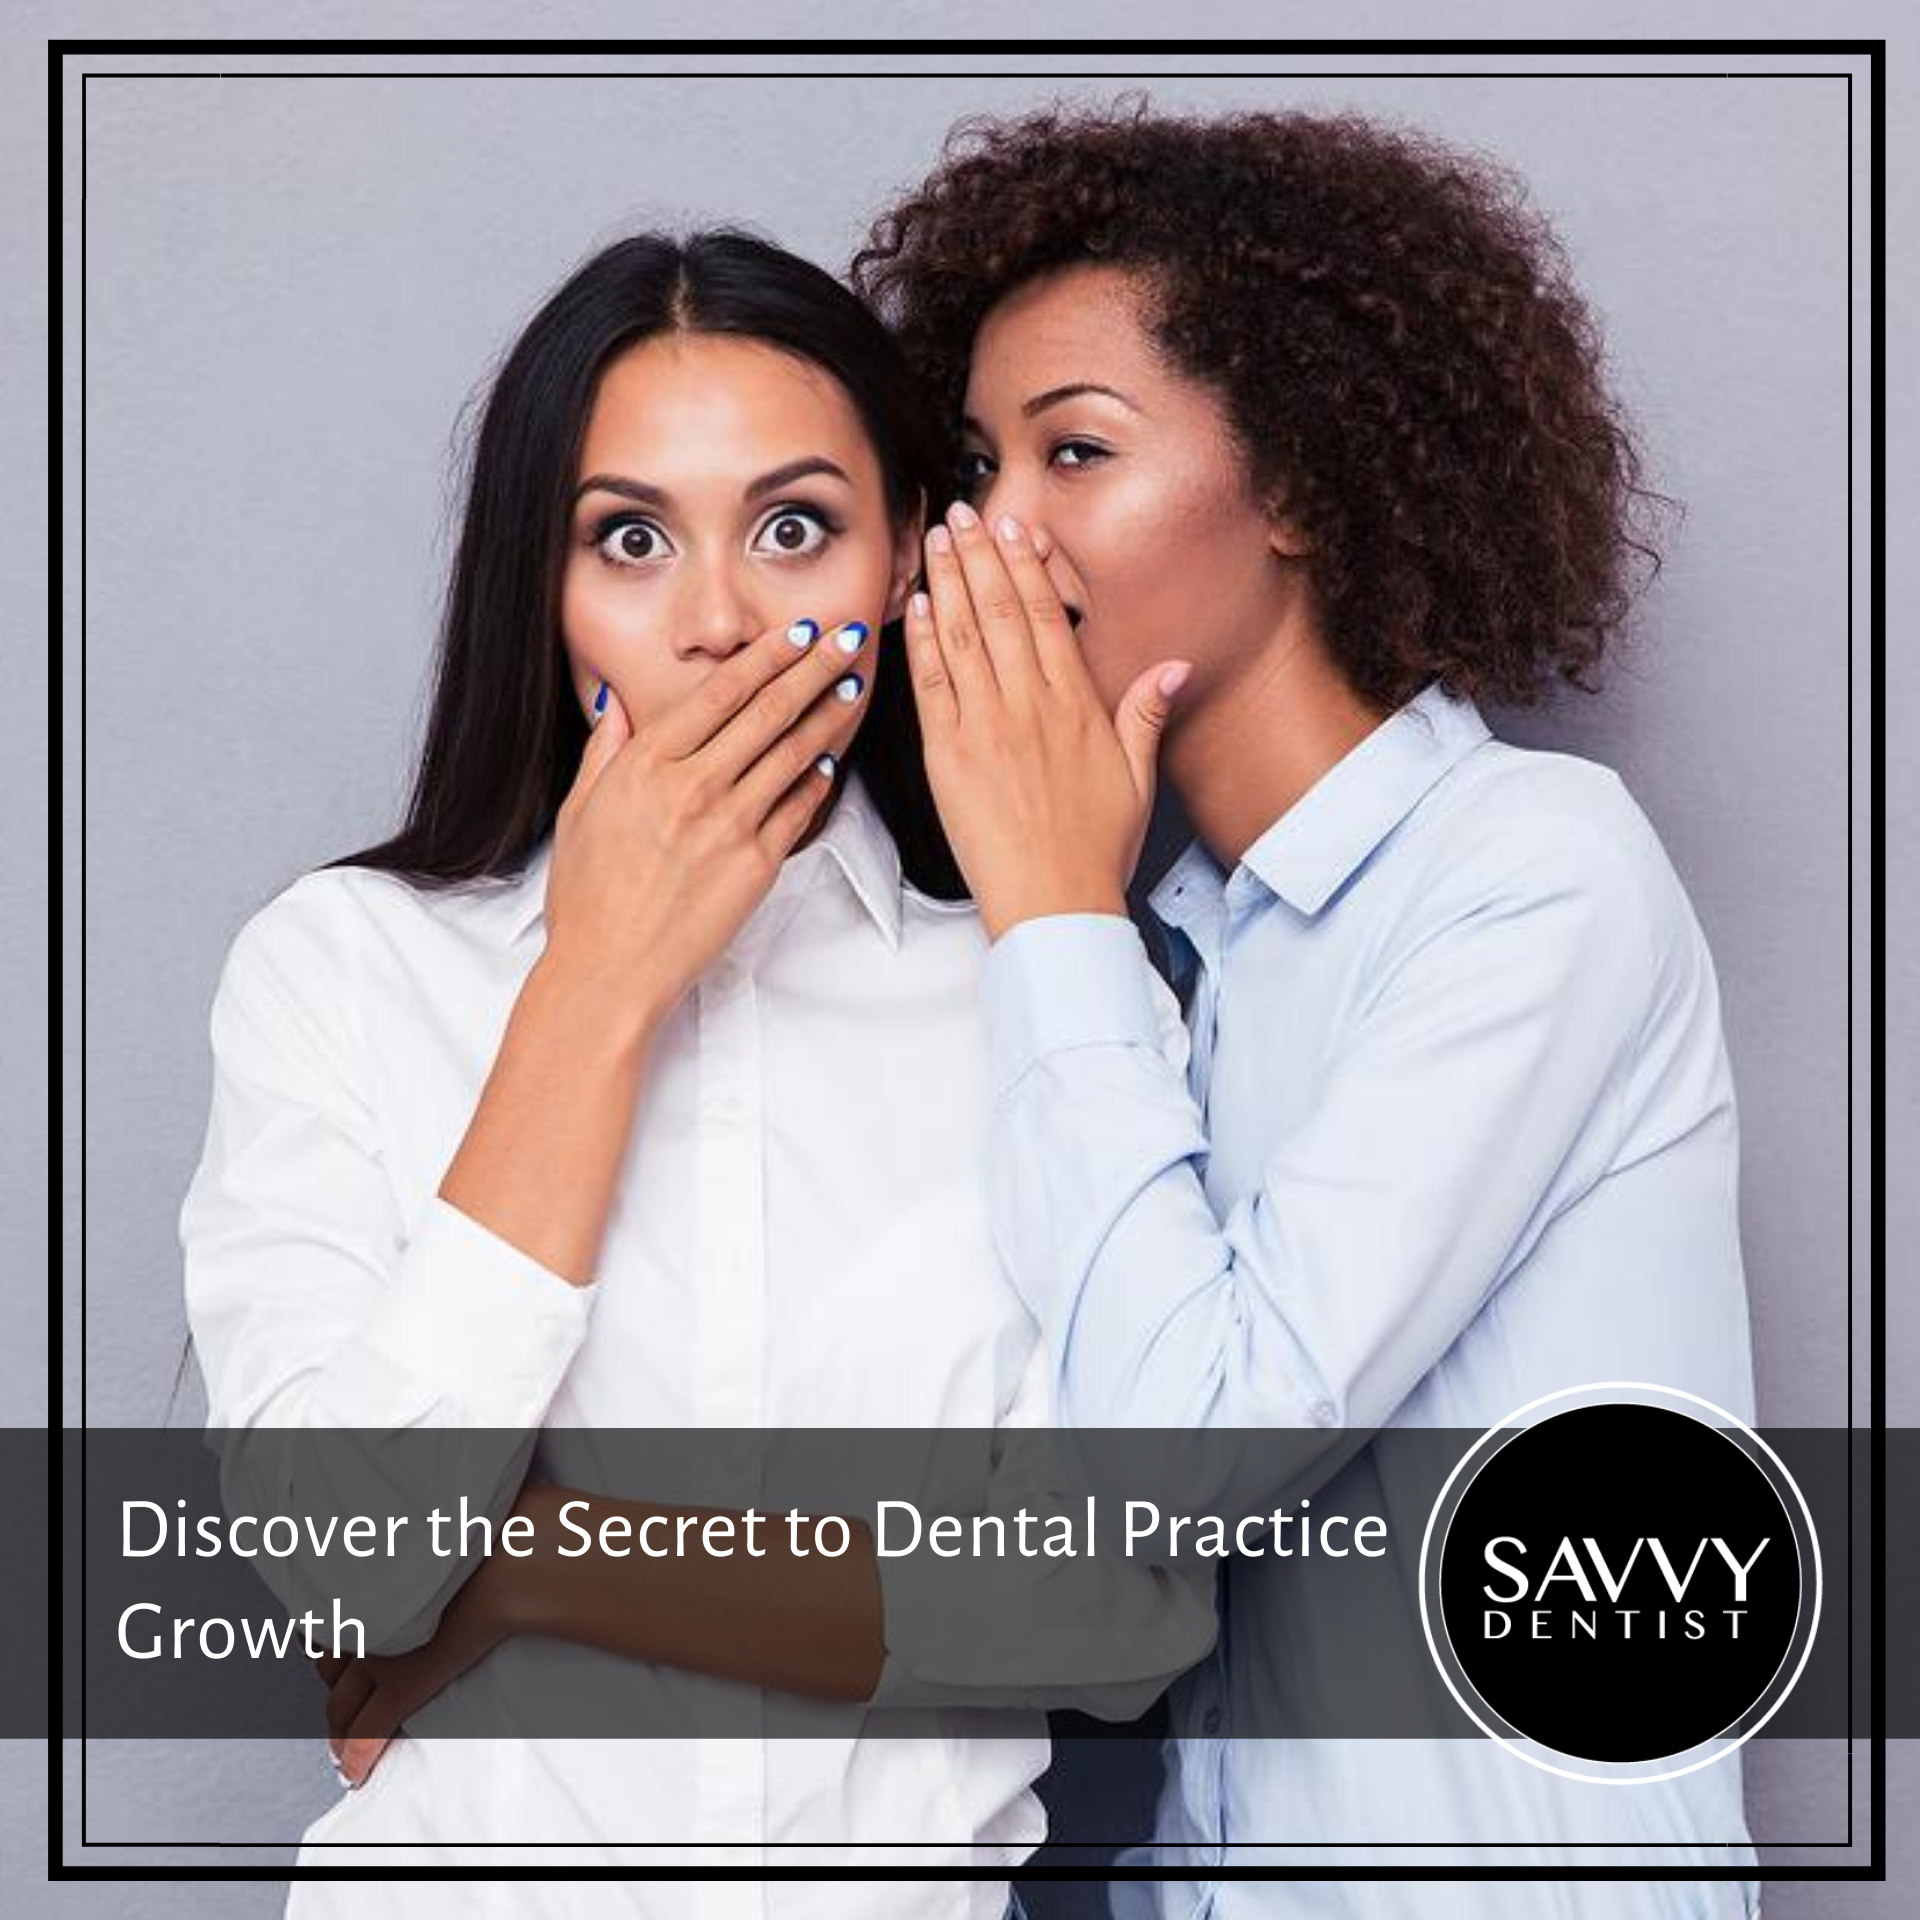 Discover the Secret to Dental Practice Growth